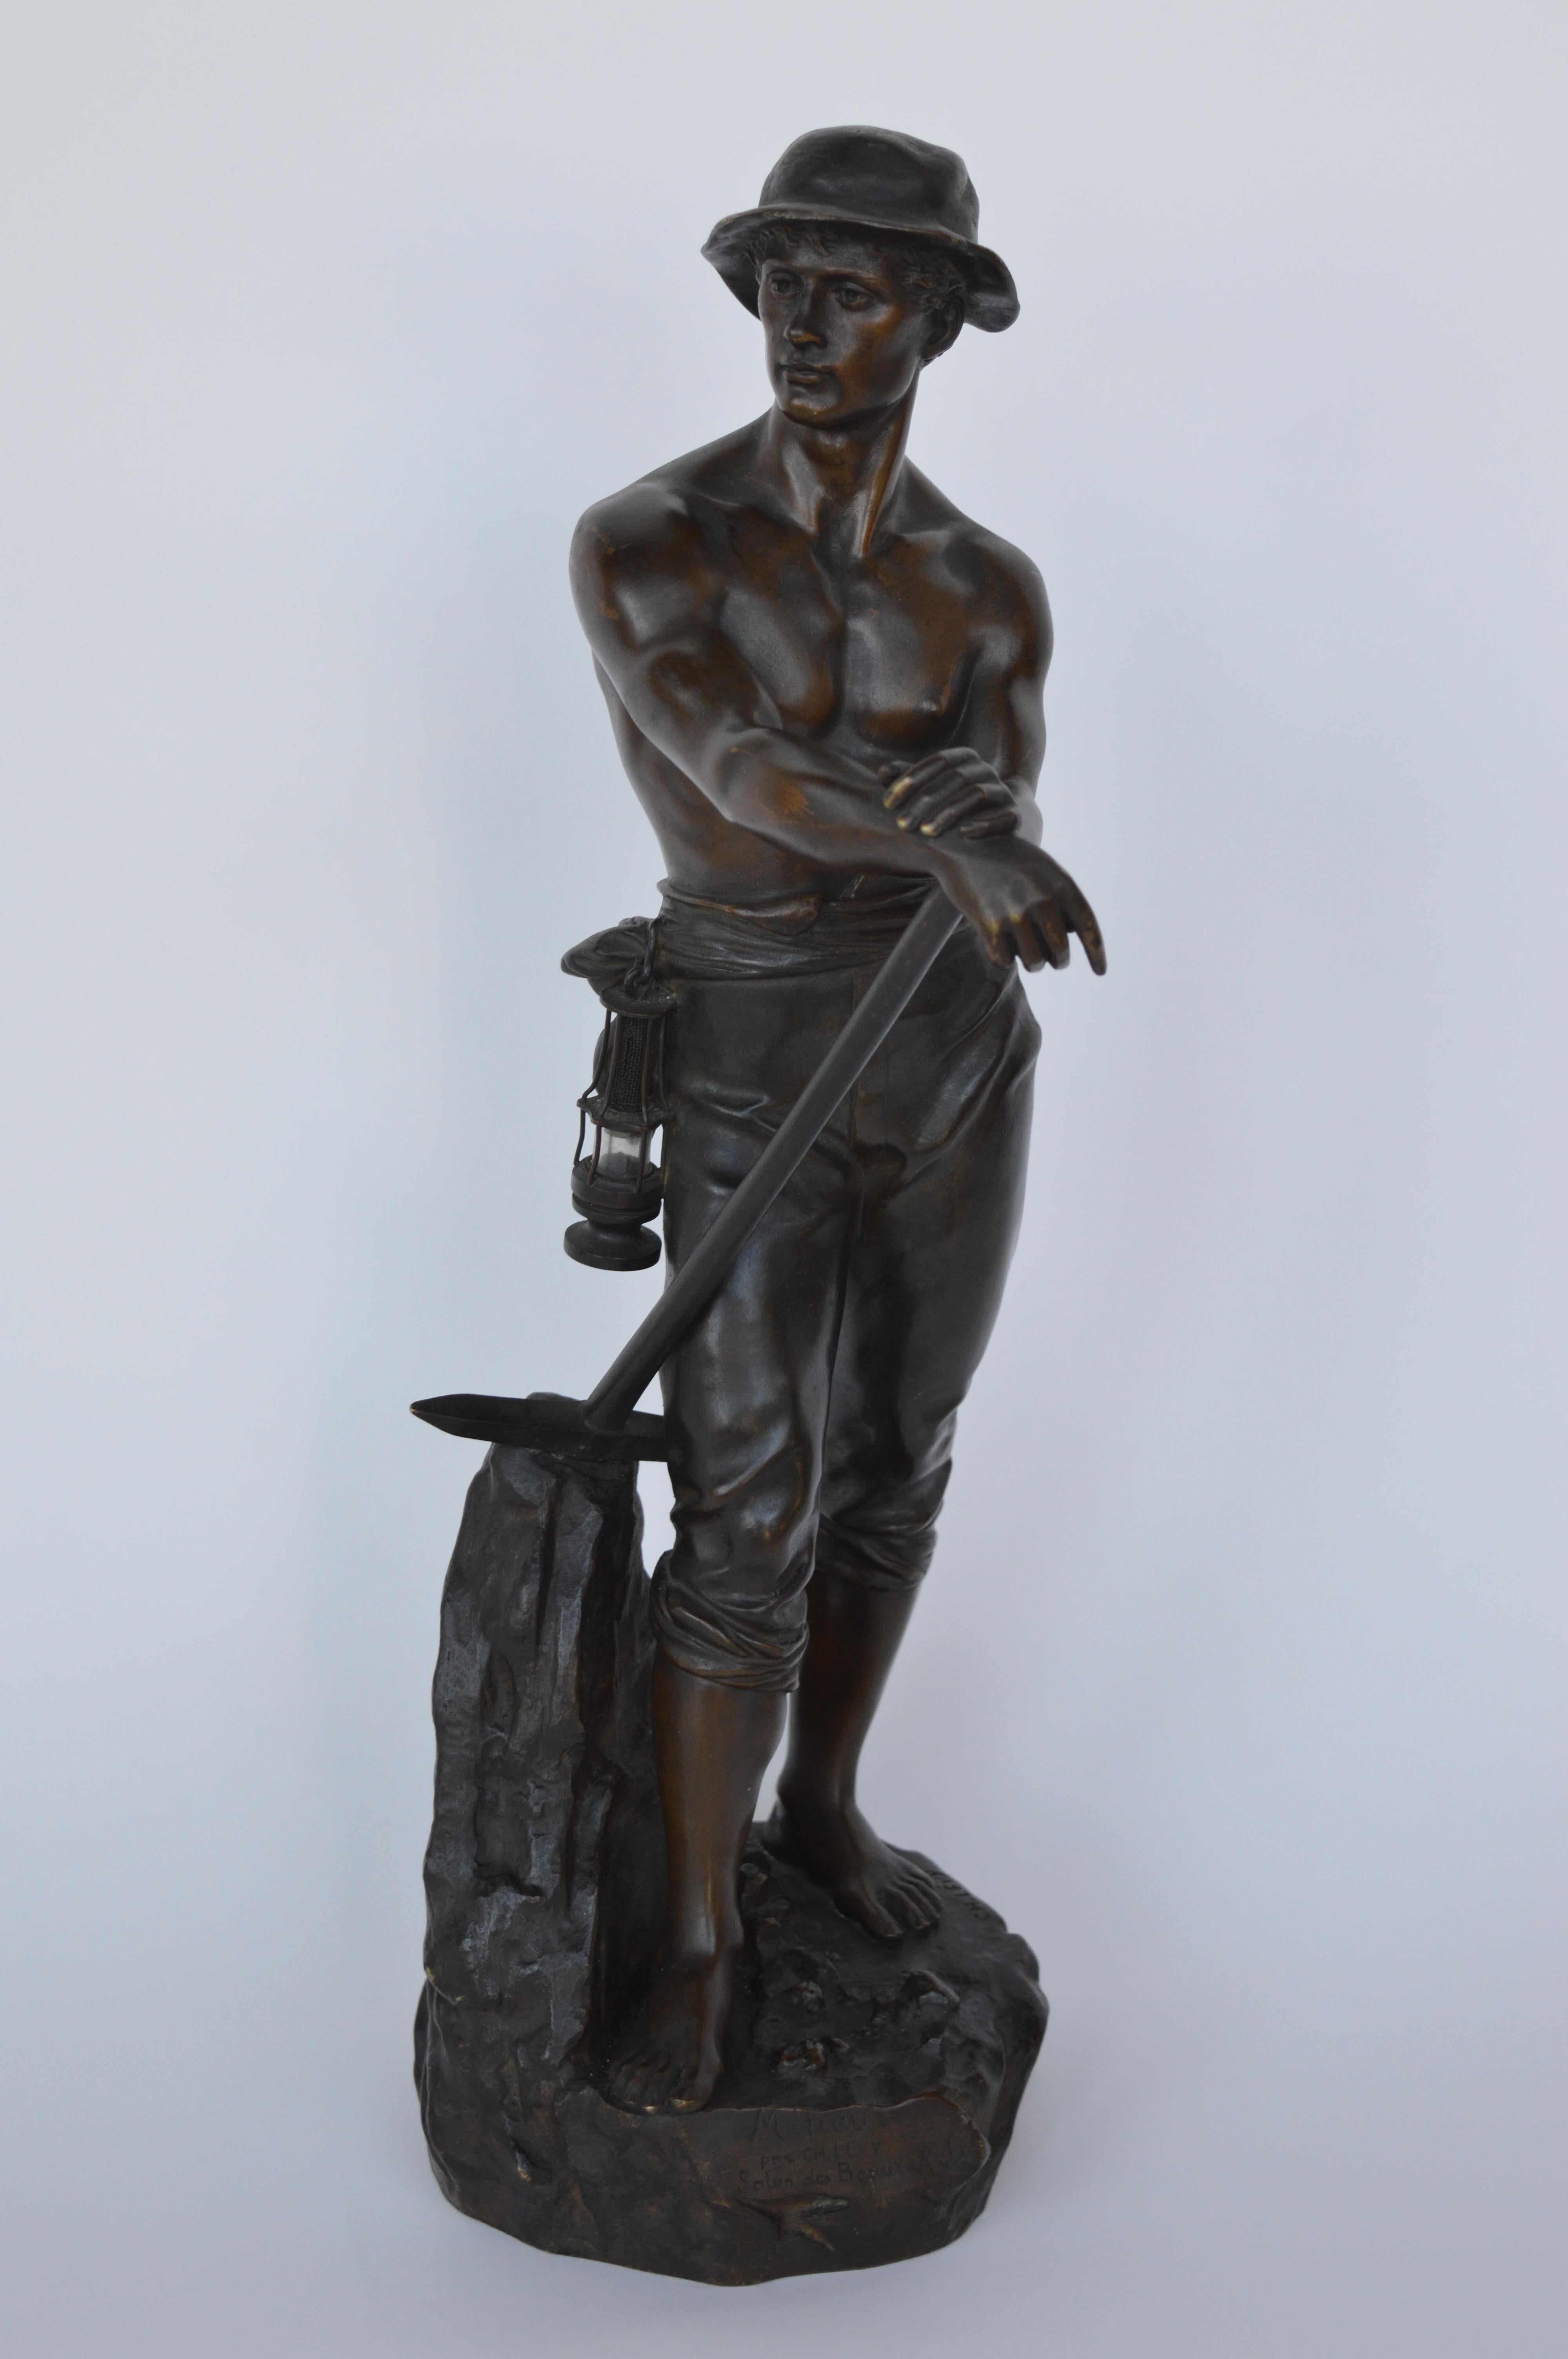 French miner in bronze by Charles-Octave Levy, France, 1820-1899.
Signed with titled Mineur par and CH Levy / Salon des Beaux - Arts. Numbered 9088.